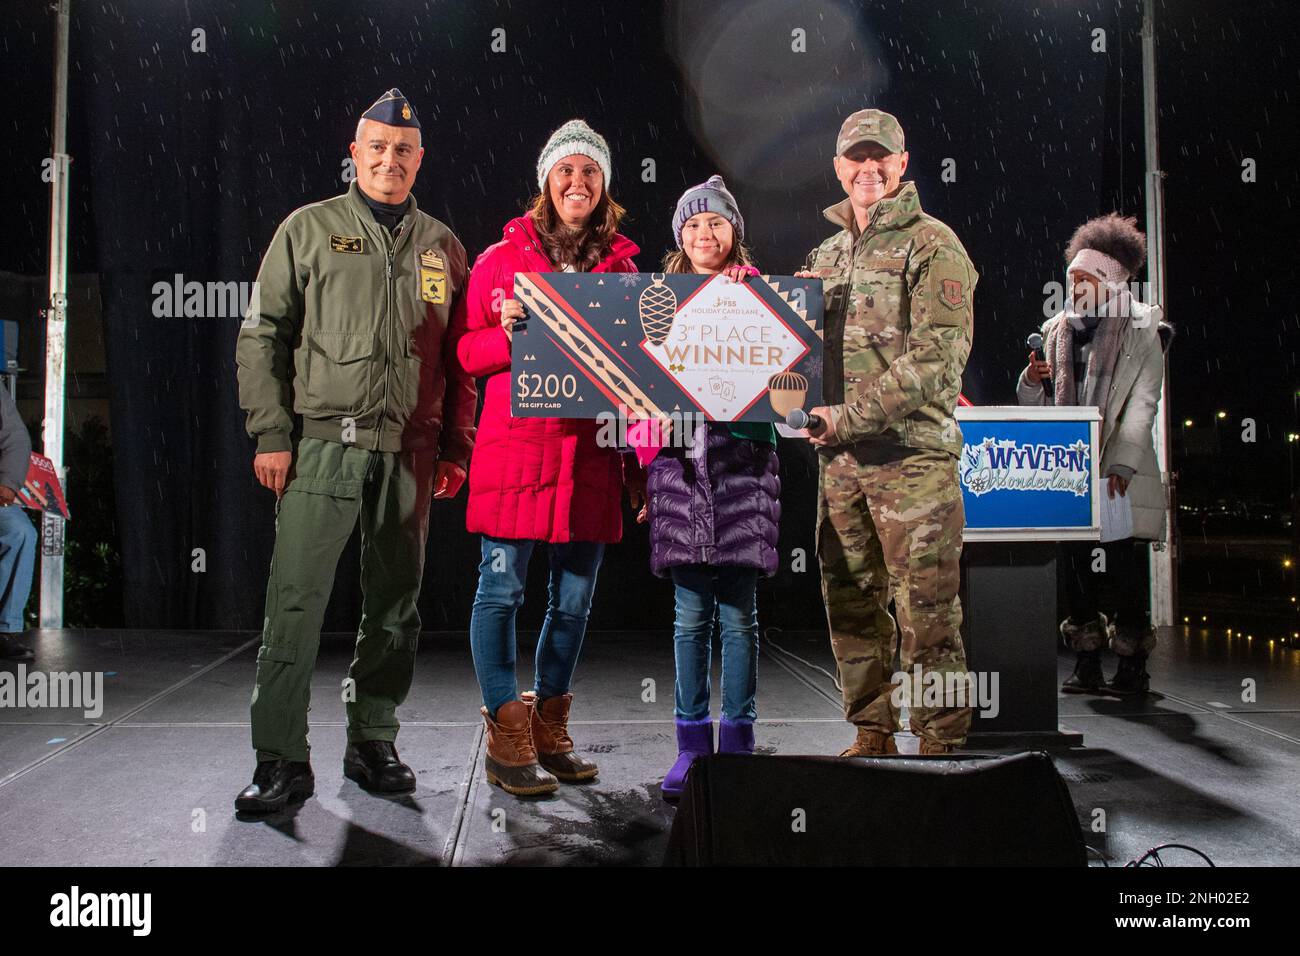 U.S. Air Force Brig. Gen. Tad Clark, 31st Fighter Wing commander, far right, and Italian Air Force Lt. Col. Riccardo Isoli, operations chief, far left, present the third place for the holiday card decoration contest prize to representatives from the 510th Fighter Squadron, middle, during the Wyvern Wonderland holiday event at Aviano Air Base, December 2, 2022. Wyvern Wonderland provided a host of events and activities to help families connect with each other and thrive during their time in Italy. Stock Photo